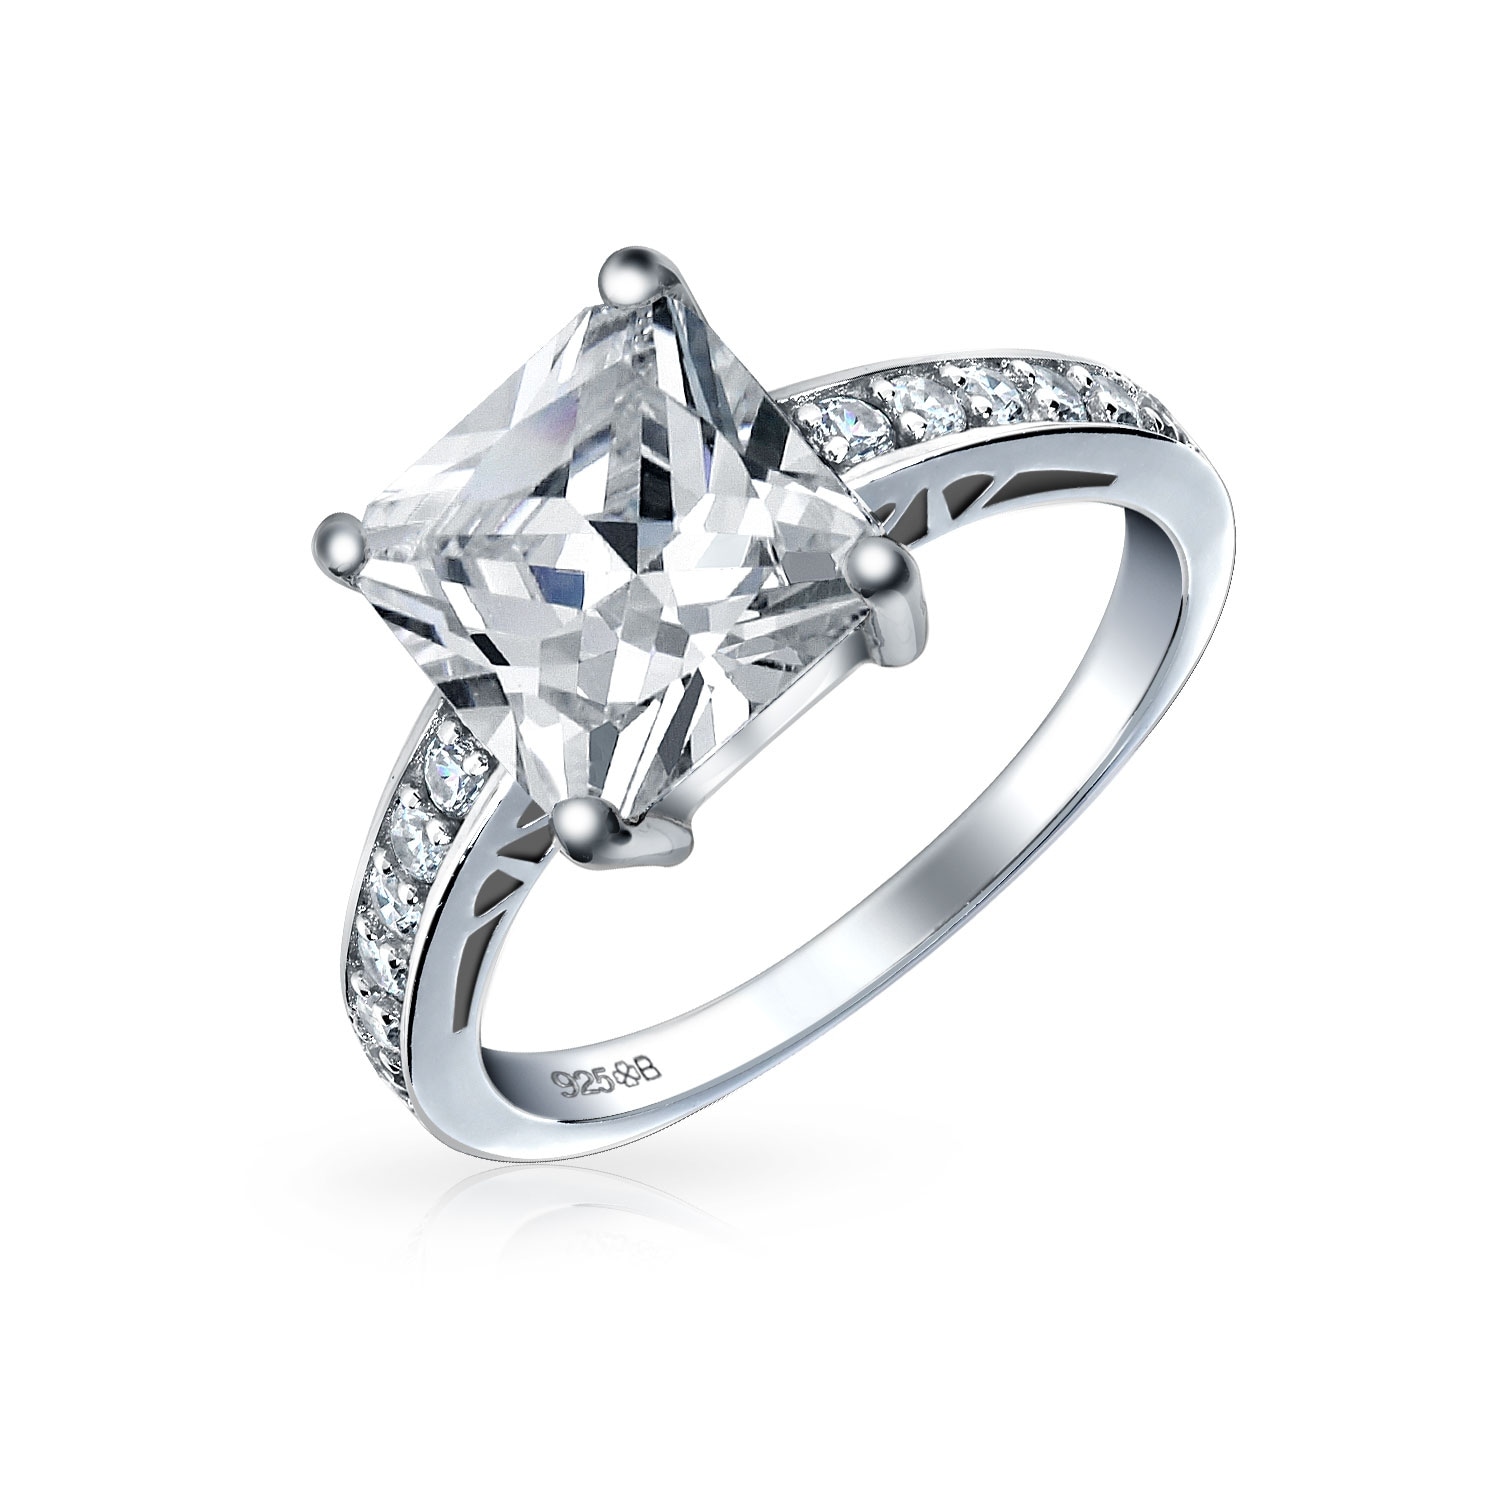 925 Sterling Silver 2 Carat Cubic Zircon Diamond Wedding Engagement Proposal Solitaire Ring